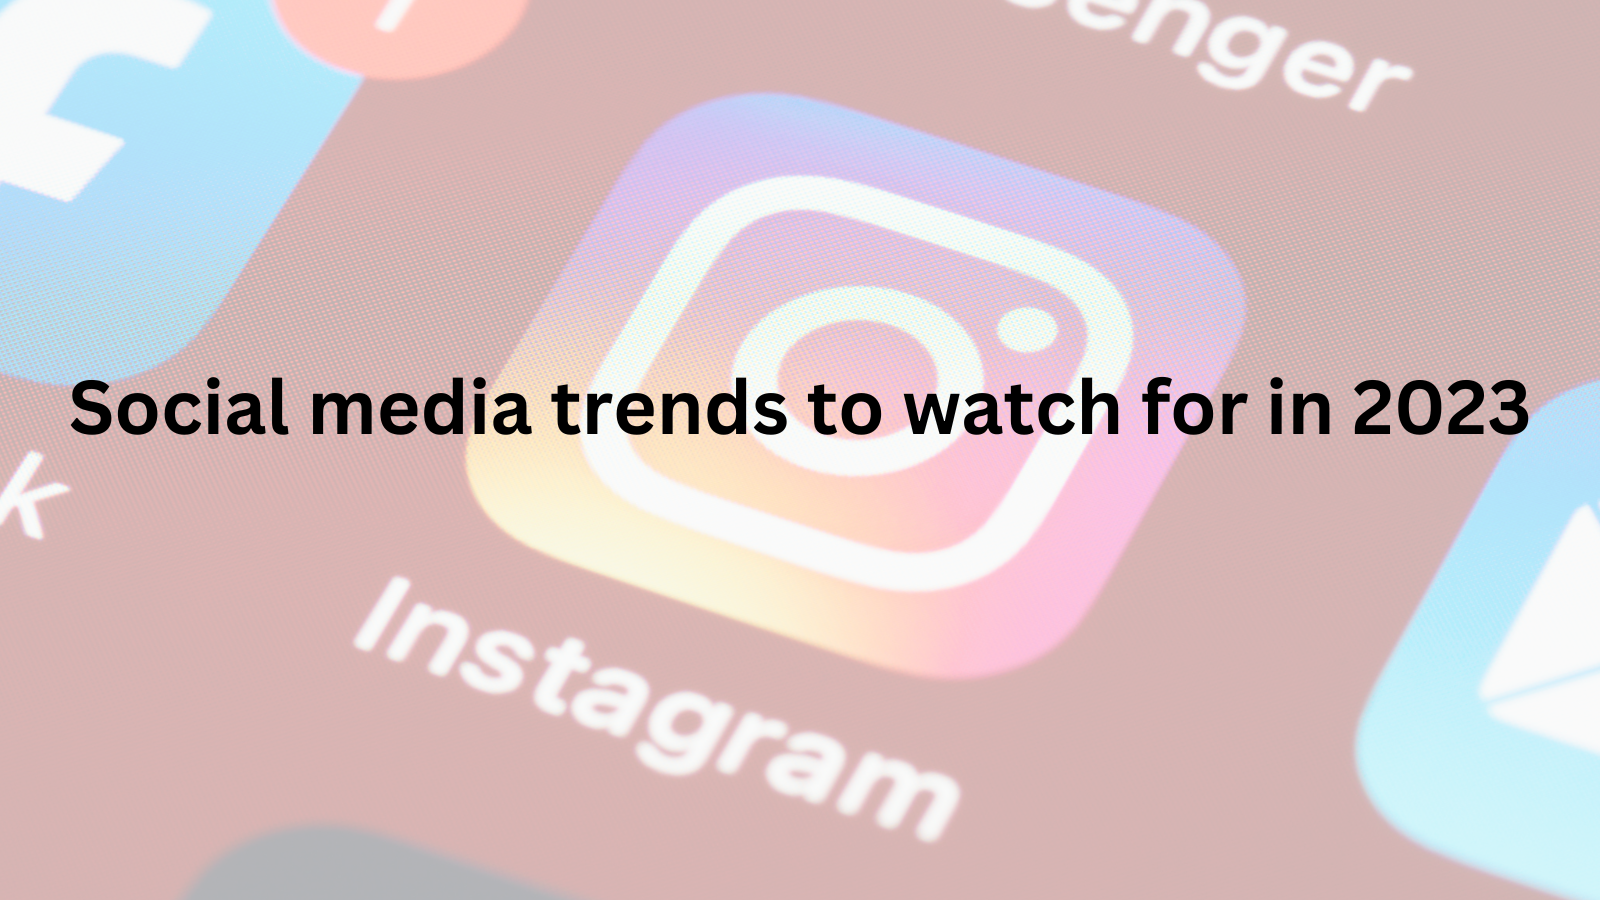 Social media trends to watch for in 2023